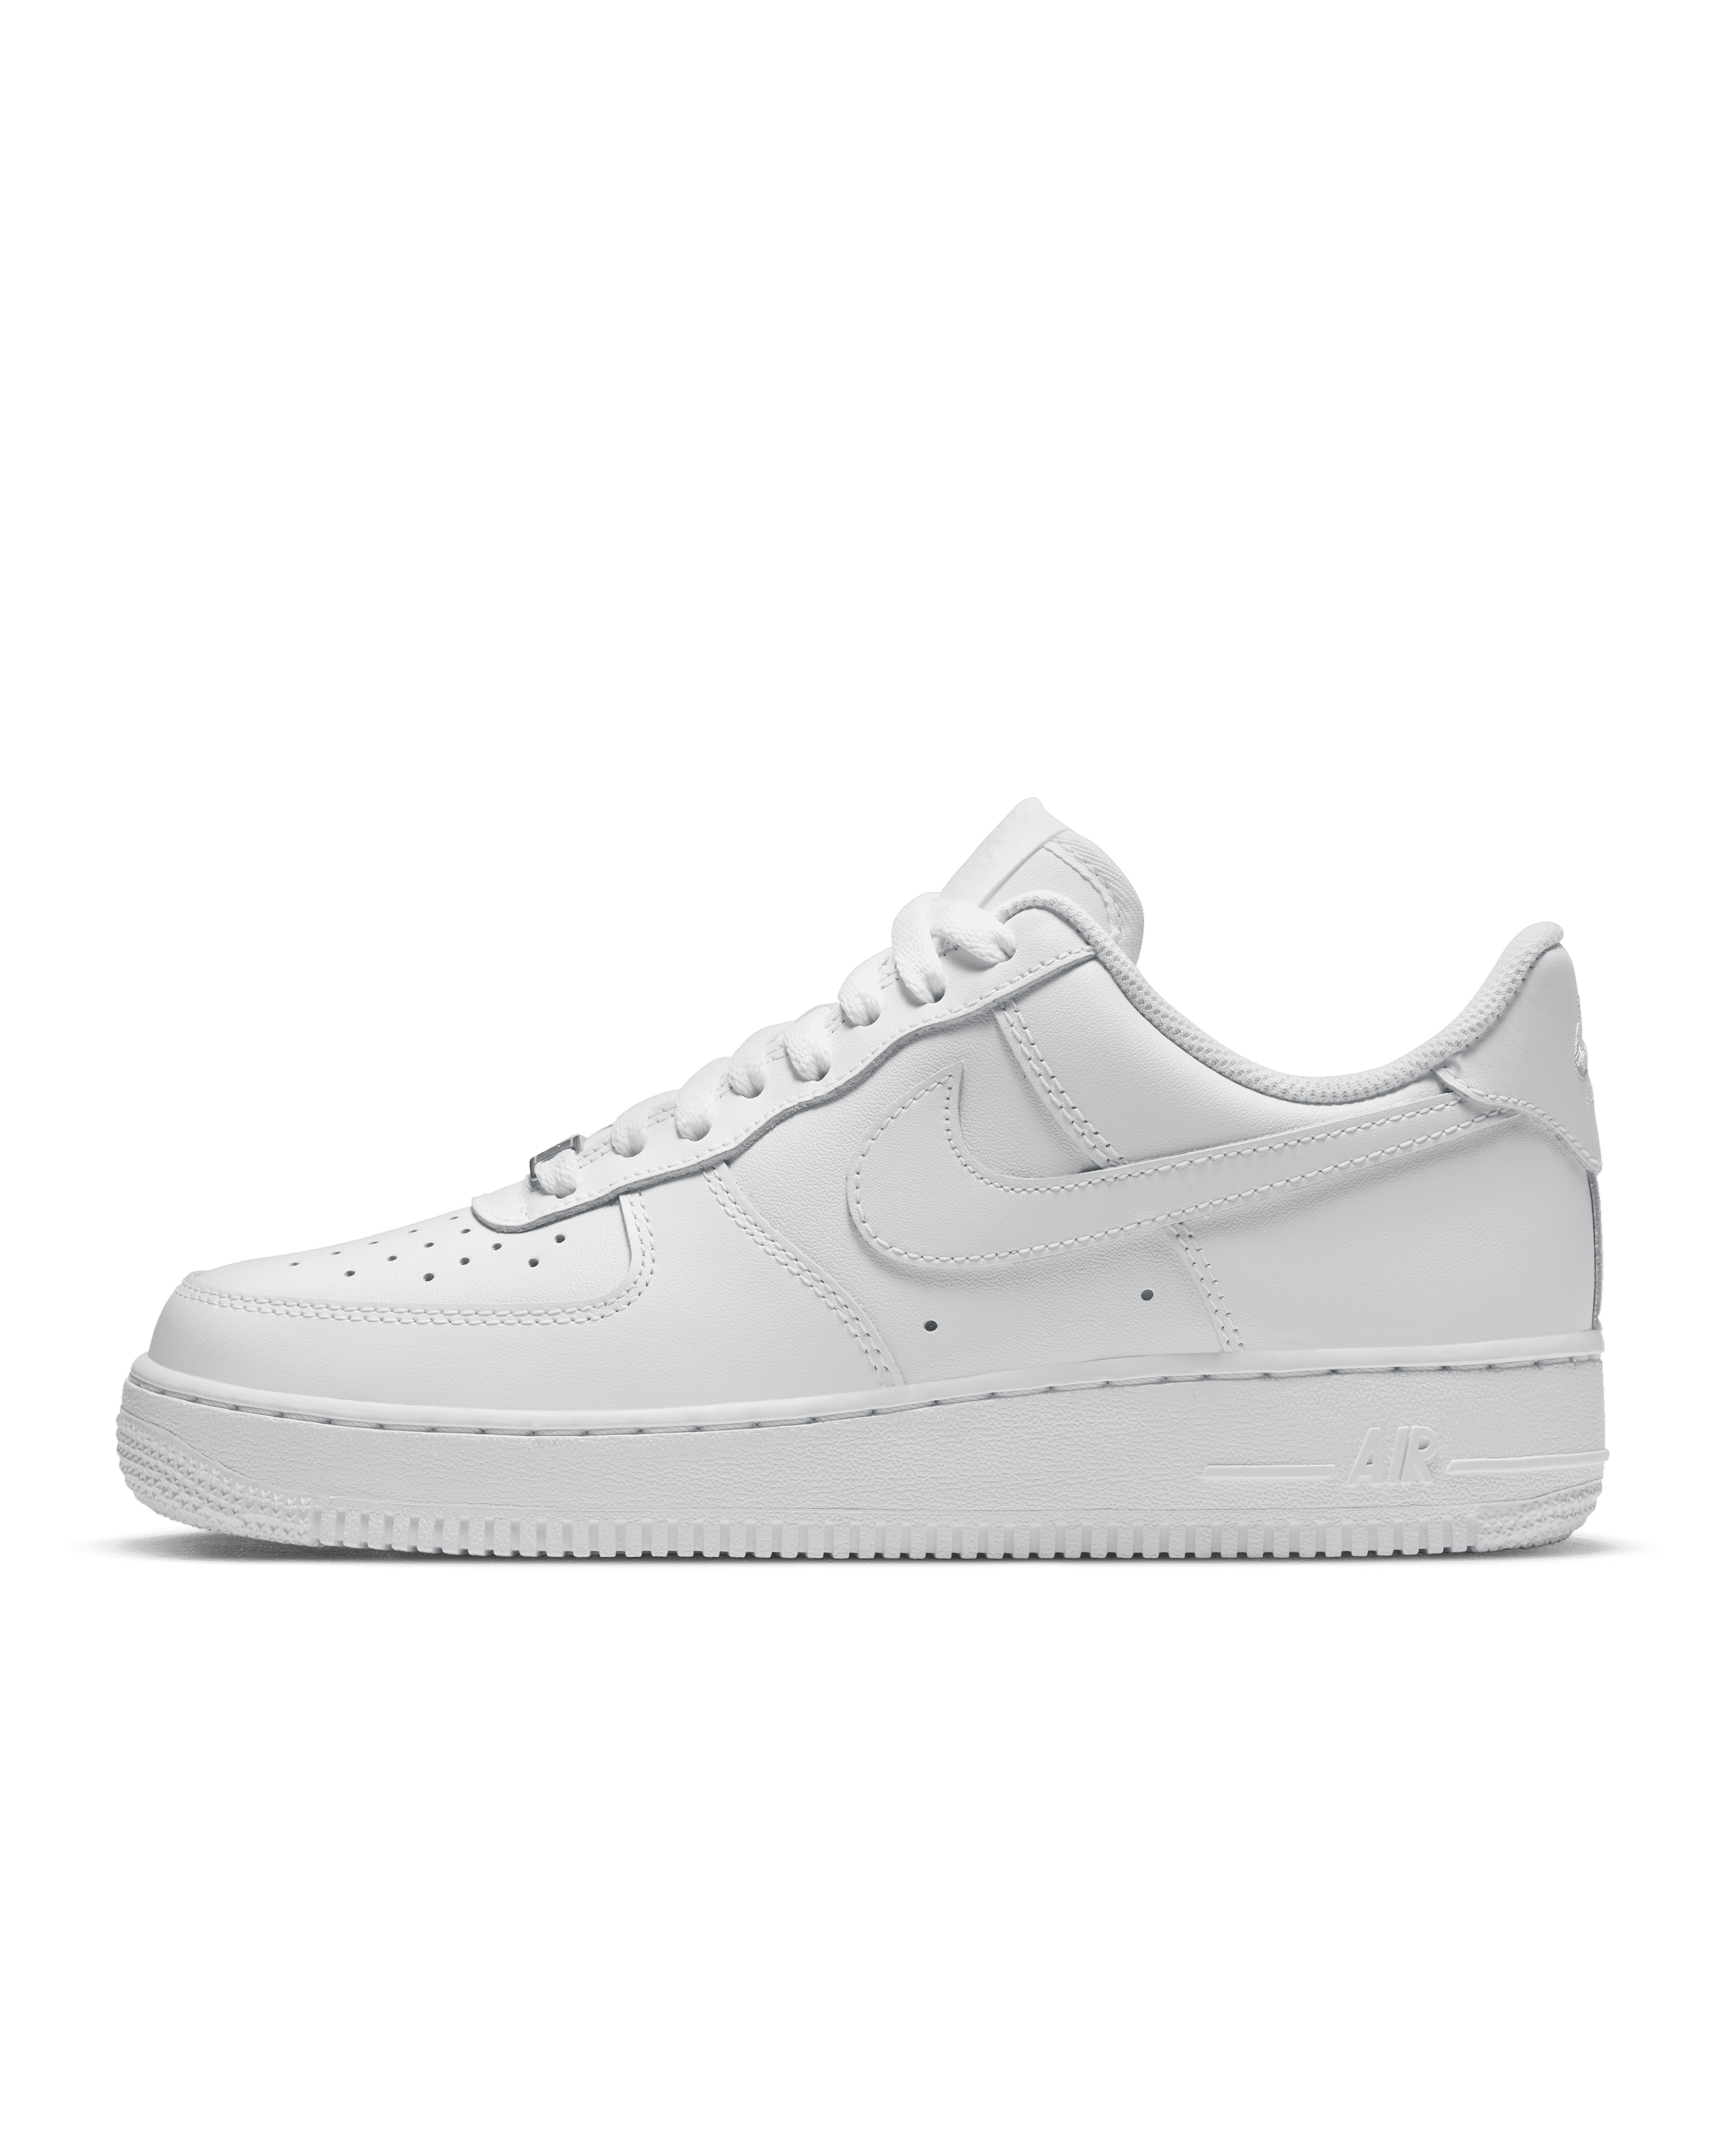 Check out Nike Air Force 1 Low 'Fiesta' sneakers